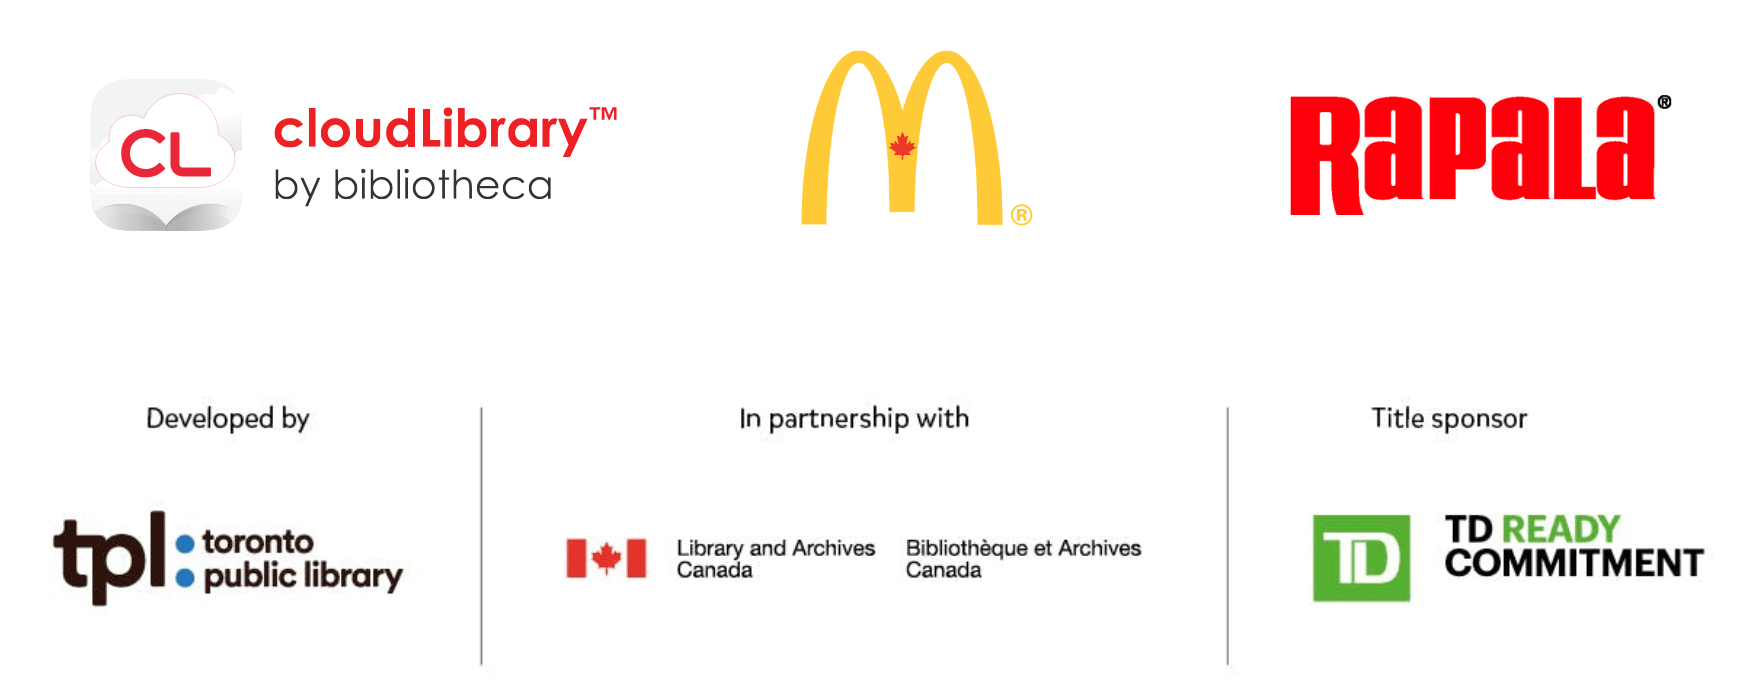 Logo for cloudLibraryTM by bibliotheca, logo for McDonalds, logo for Rapala, Developed by logo for Toronto Public Library, In partnership with logo for Library and Archives Canada, Title sponsor logo for TD Canada Trust